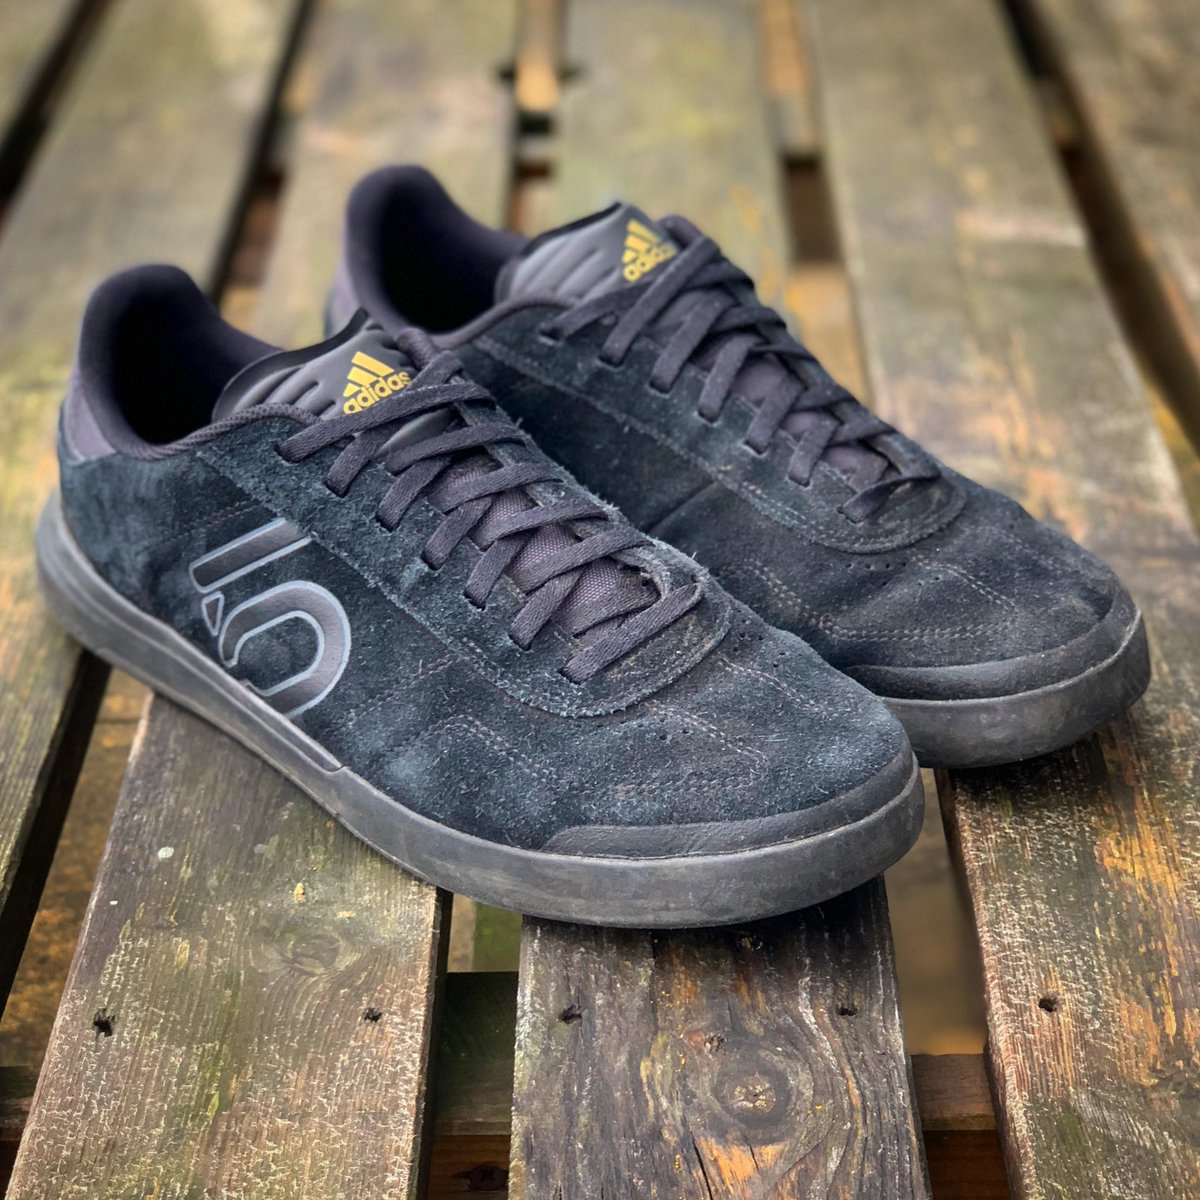 Molesto Atlas la carretera Danny MacAskill on Twitter: "After loads of use and abuse the new @adidas  @fiveten_official Sleuth dlx's are definitely my new favourite shoe on and  off the bike!! 👌🏼 #adidas #fiveten #mountainbike #street #